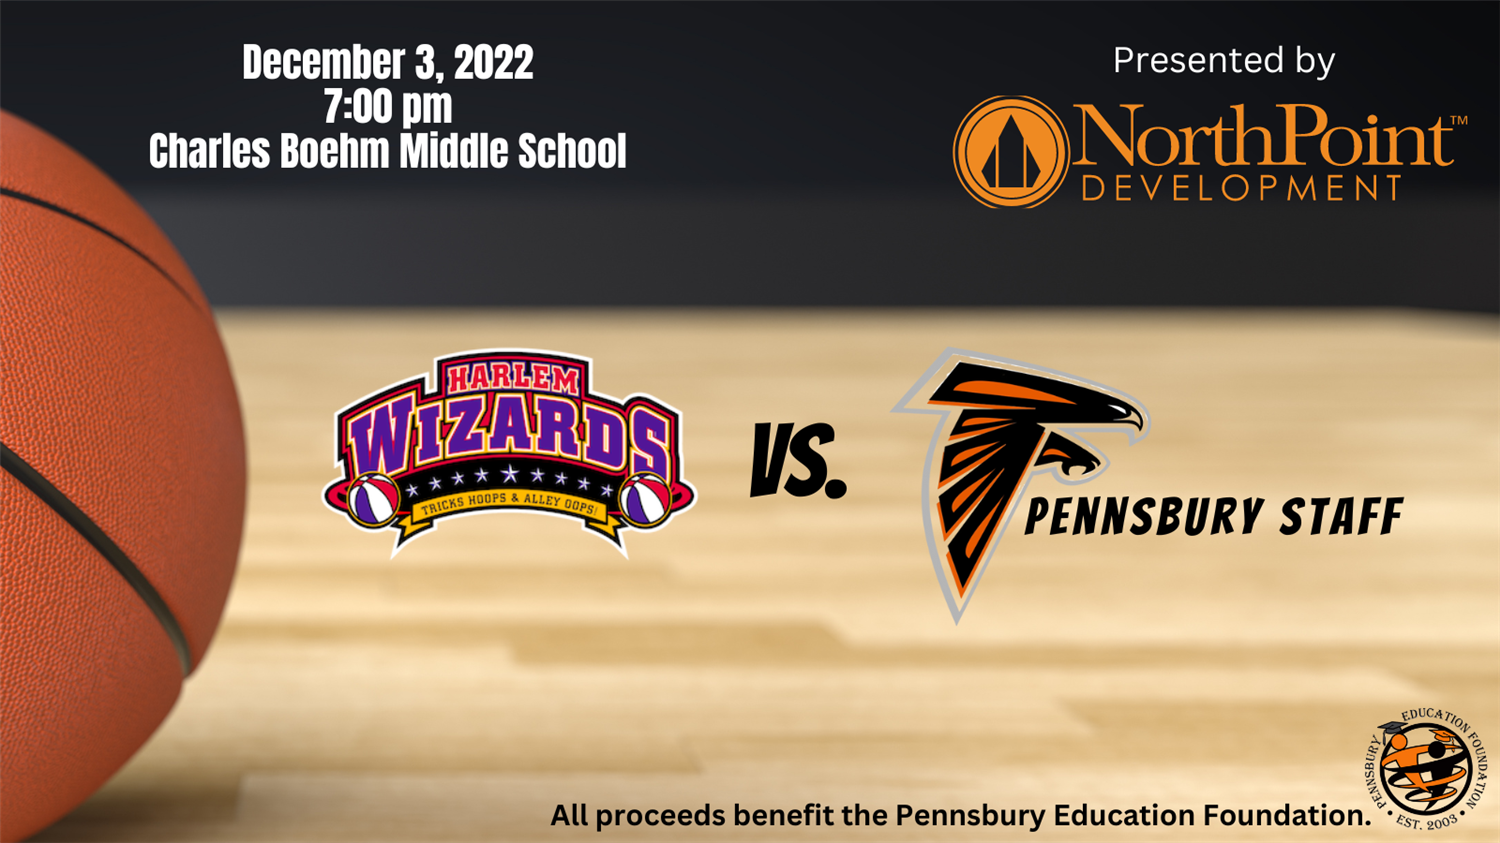 Harlem Wizards Come to Pennsbury on December 3, 2022 at 7:00 pm